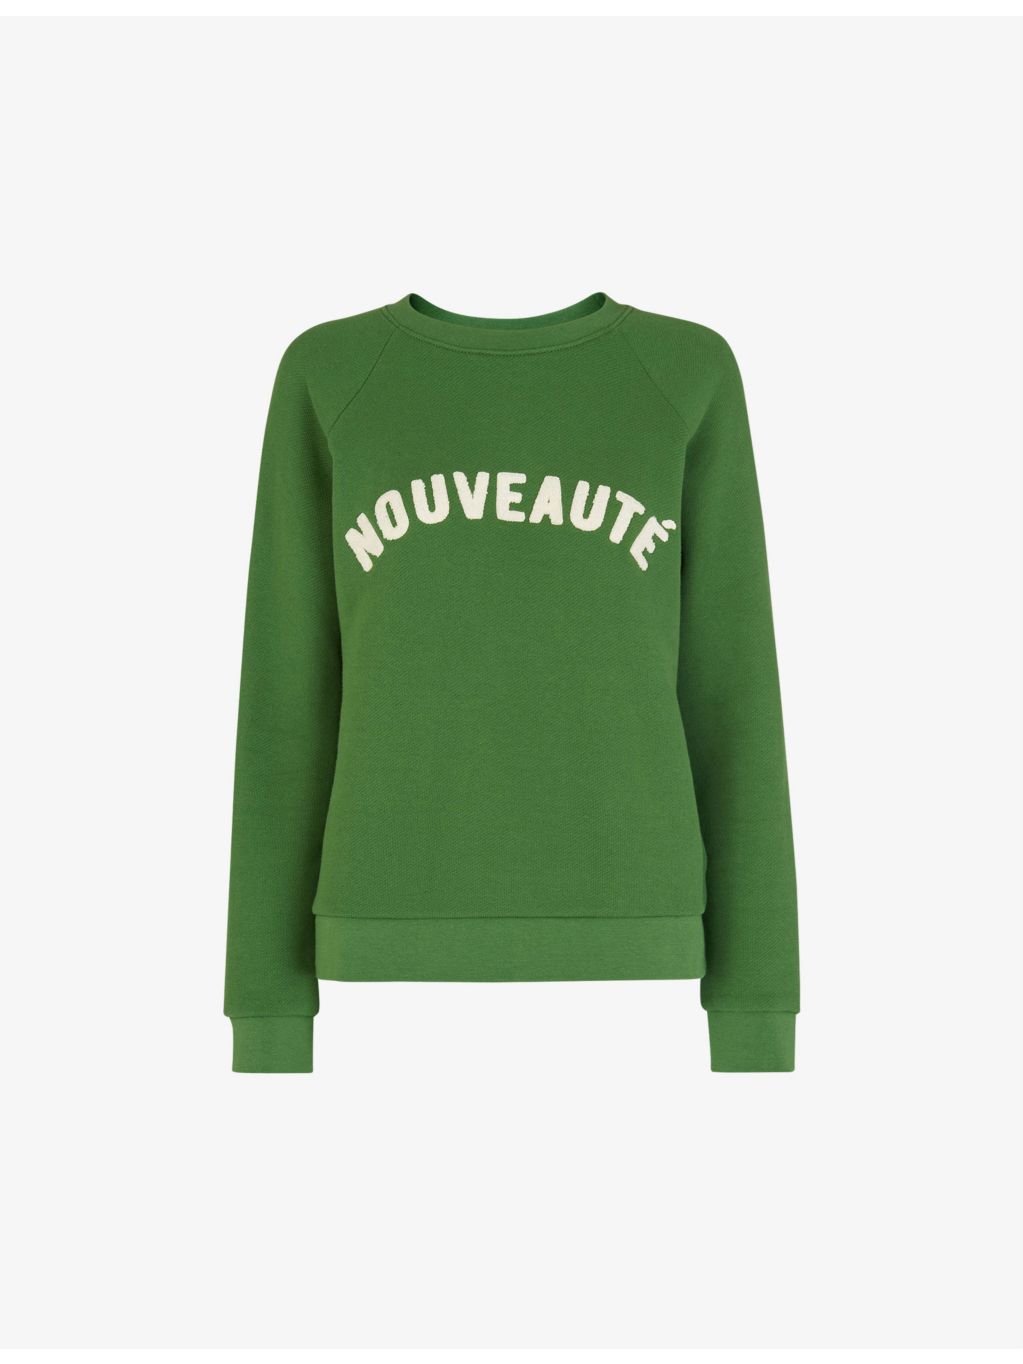 WHISTLES - Nouveaute embroidered cotton-jersey sweatshirt